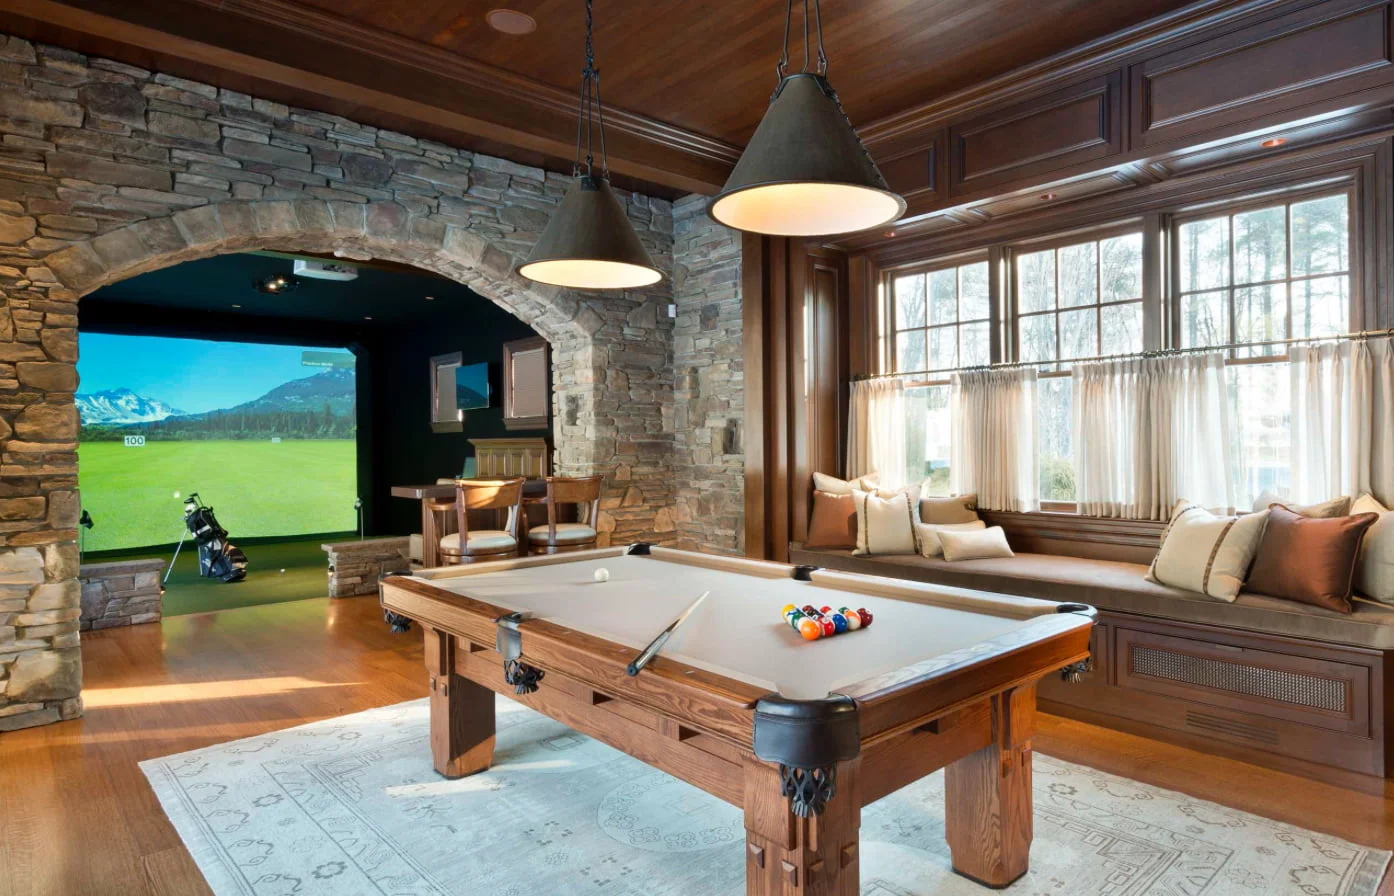 Rustic Look Man cave with Brick